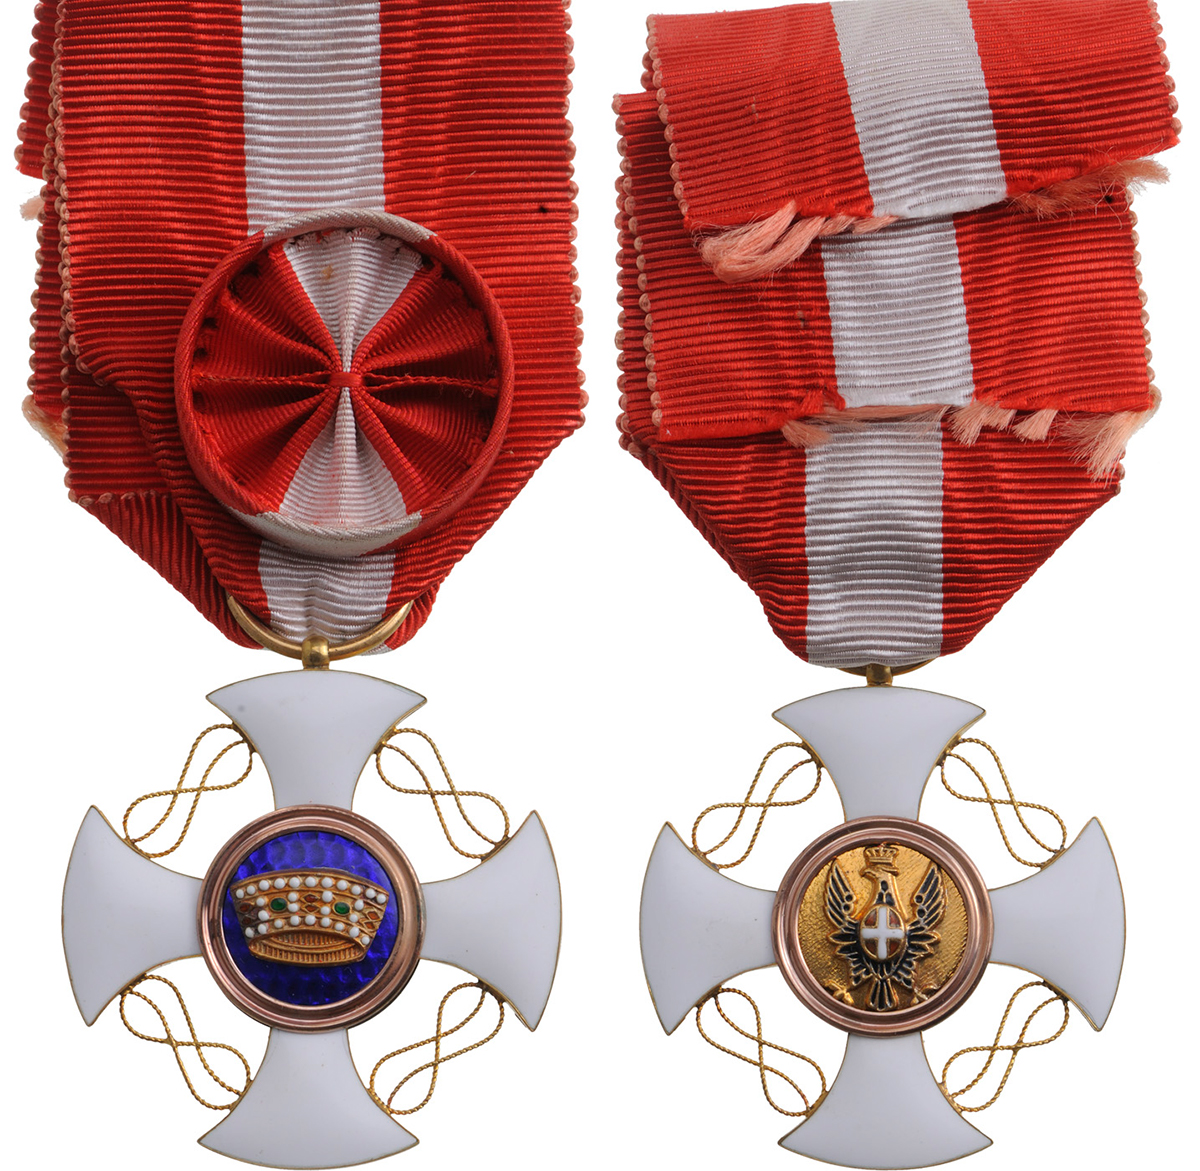 ORDER OF THE CROWN OF ITALY - Image 2 of 2